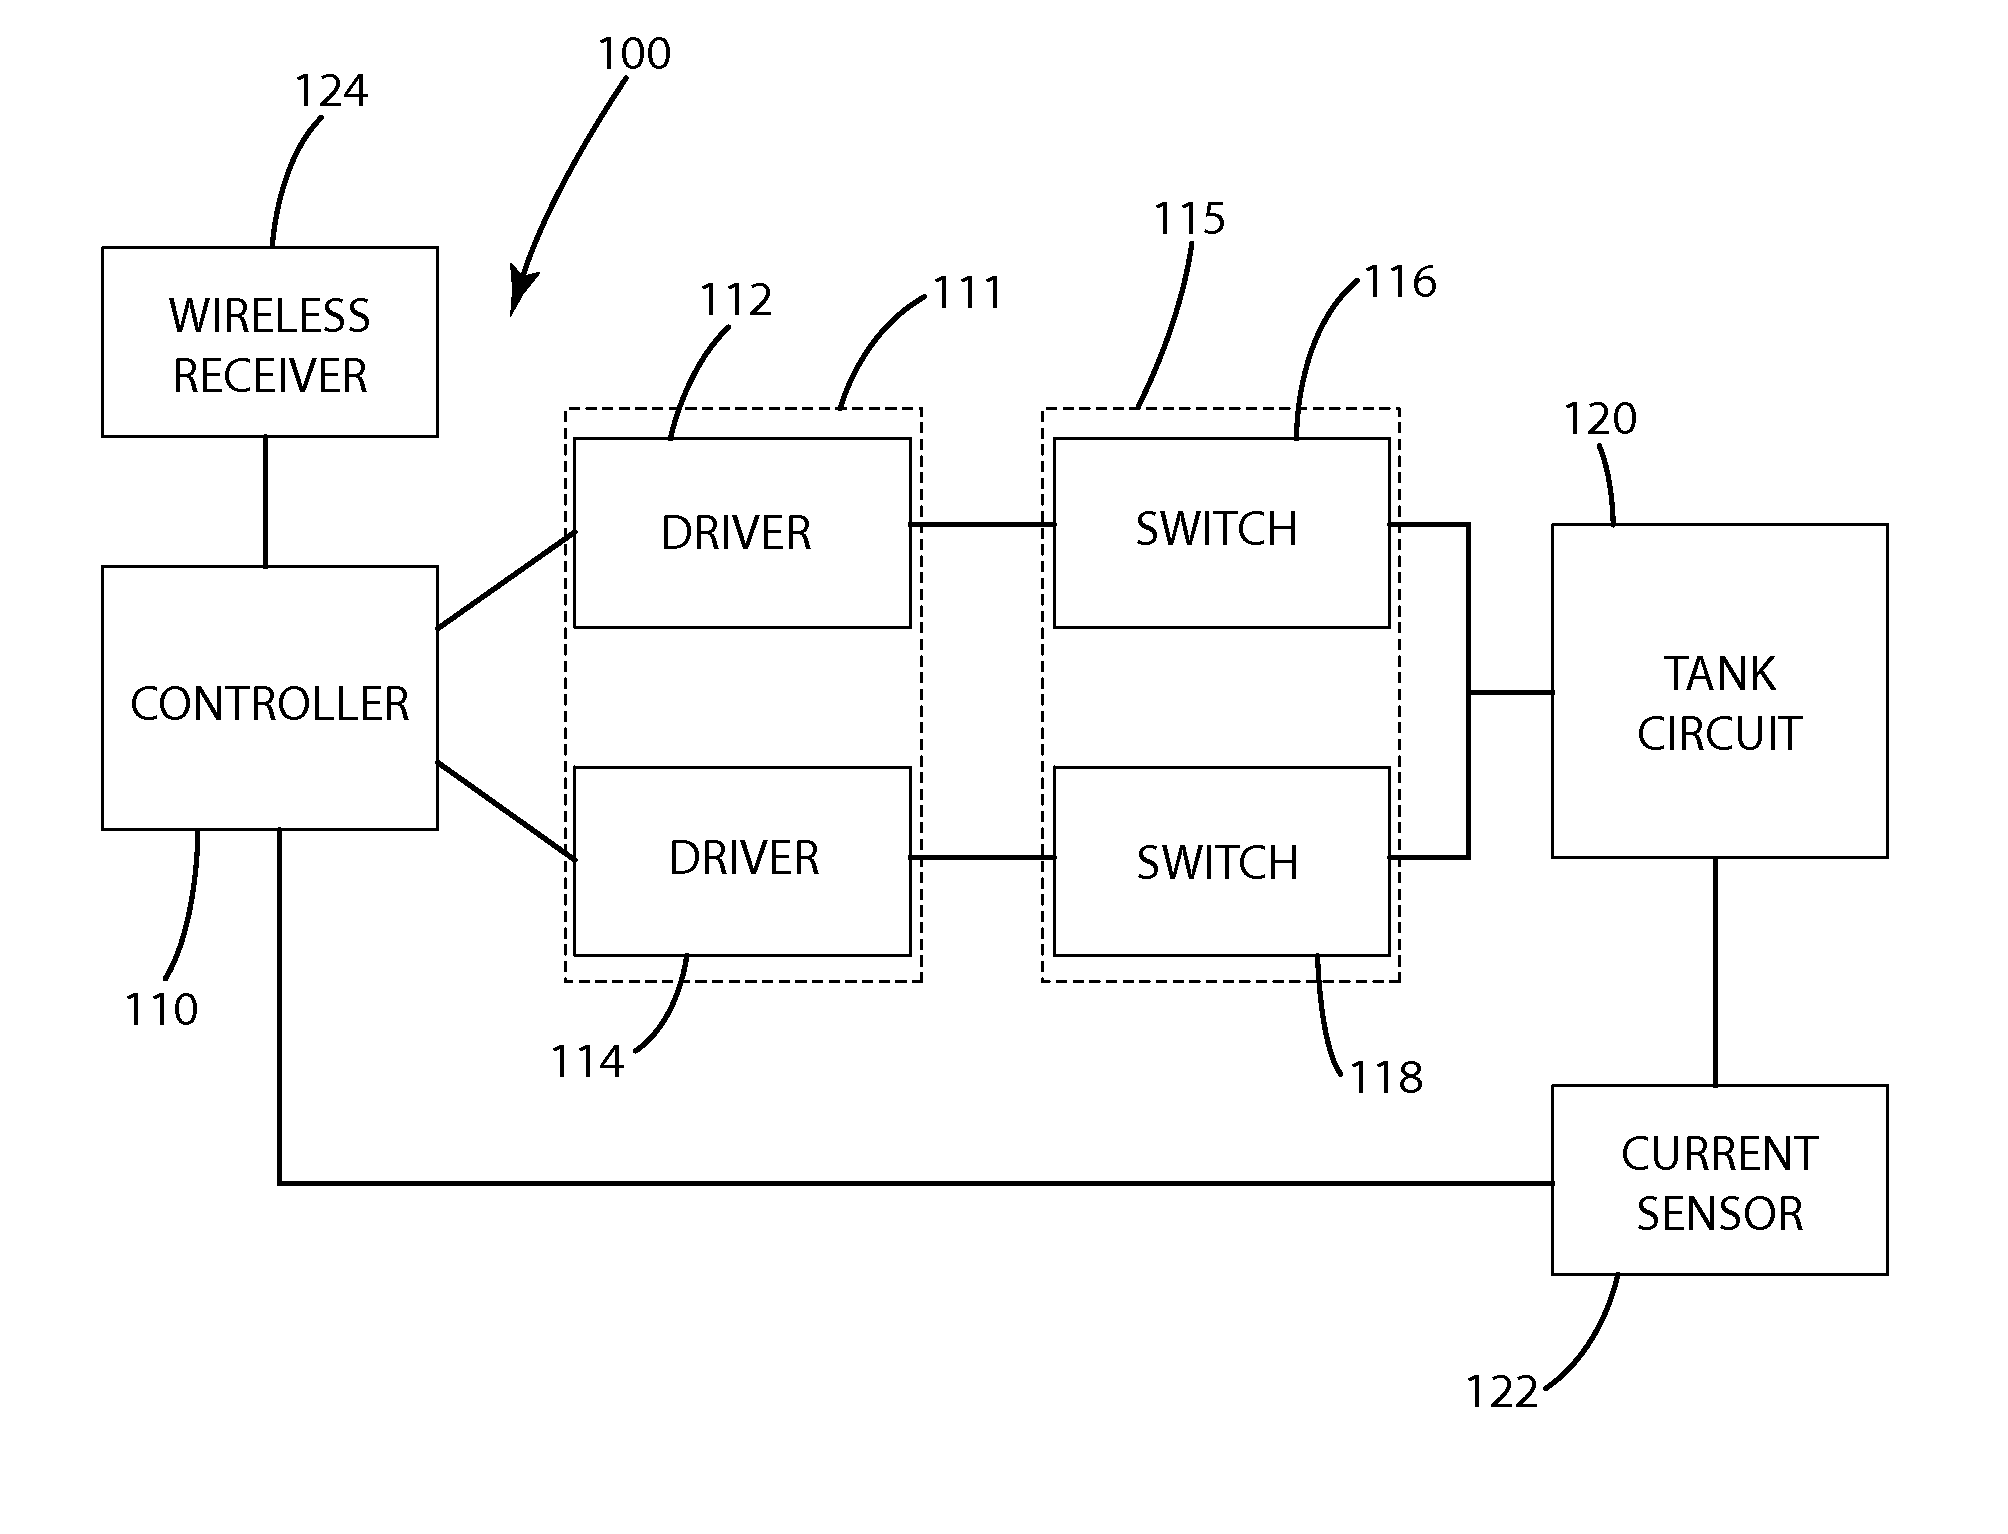 Inductive power supply with duty cycle control